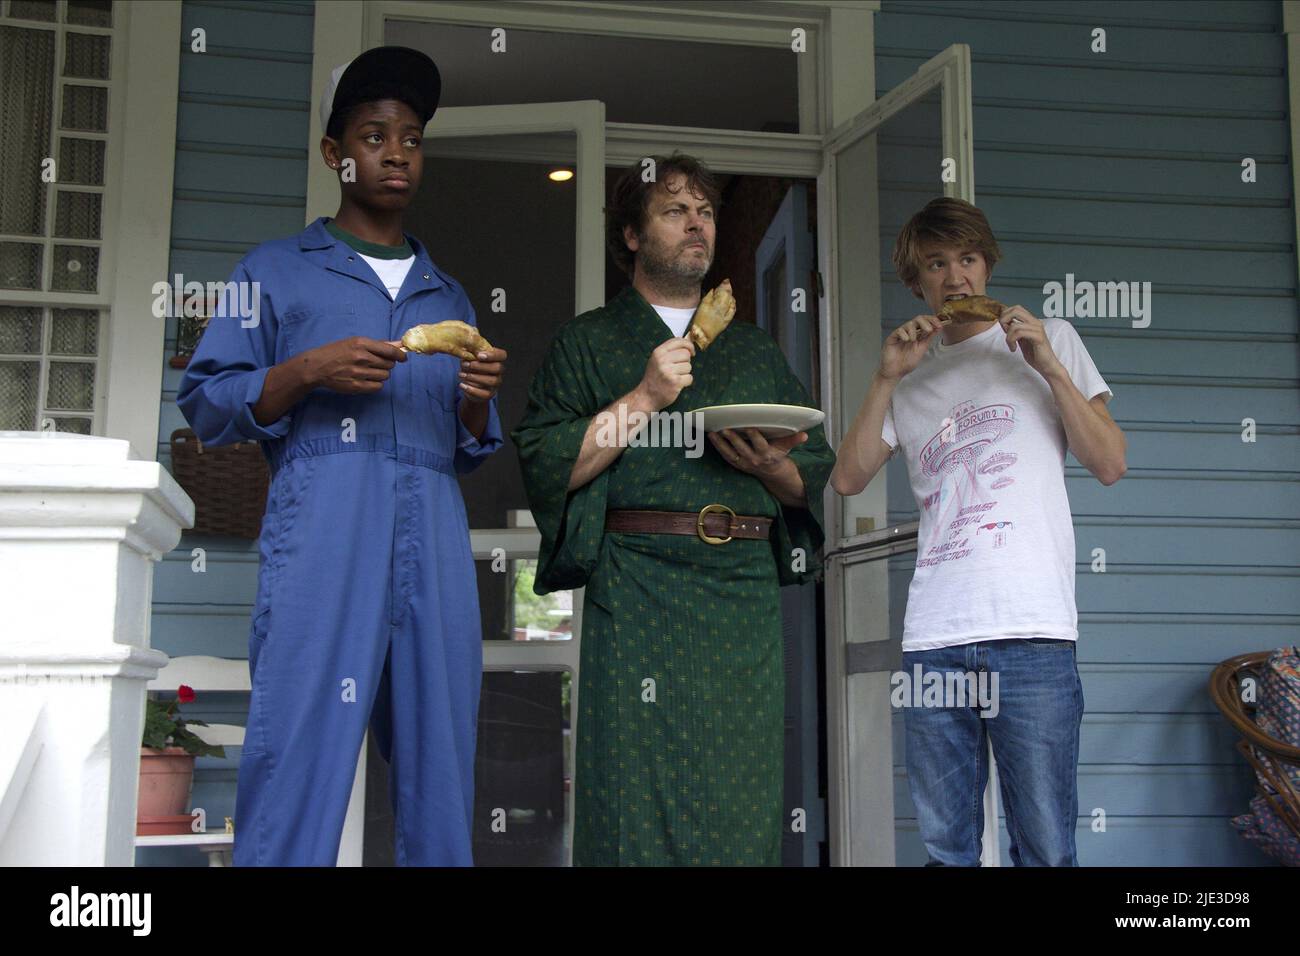 CYLER,OFFERMAN,MANN, ME AND EARL AND THE DYING GIRL, 2015 Stock Photo